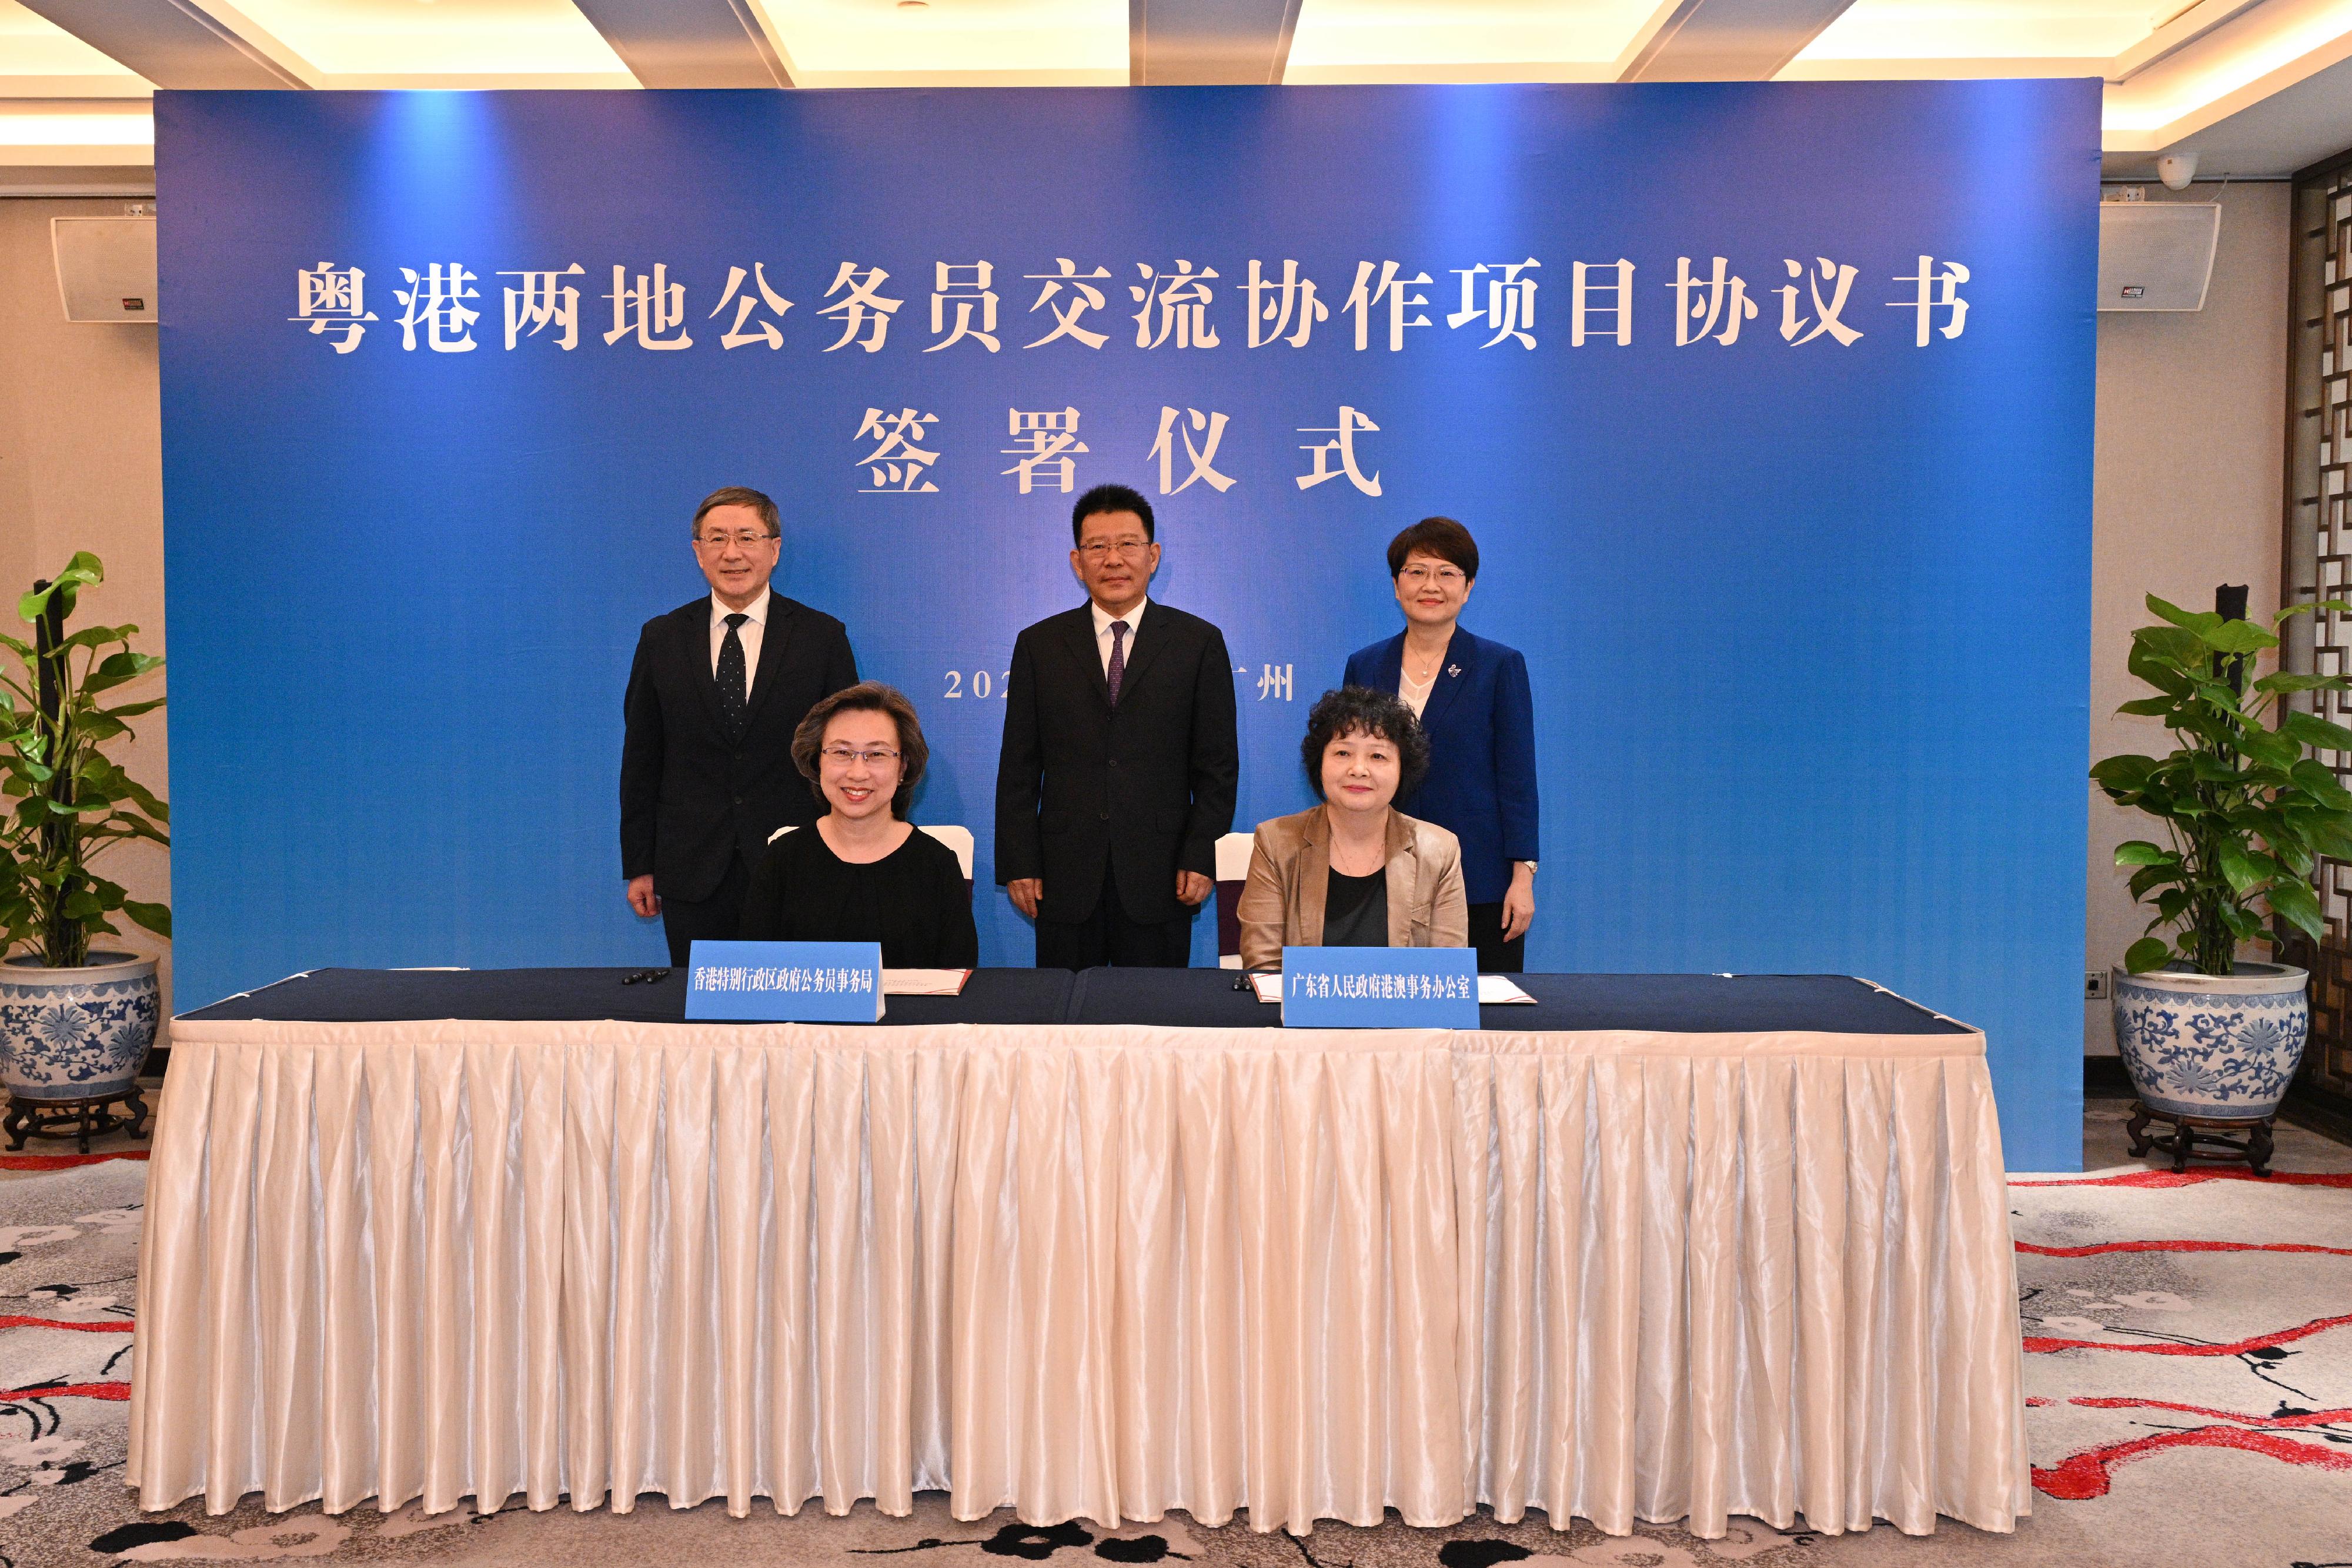 The Civil Service Bureau of the Hong Kong Special Administrative Region Government and the Hong Kong and Macao Affairs Office (HKMAO) of the People’s Government of Guangdong Province signed the Agreement on Civil Service Staff Exchange and Collaboration Programme with the Mainland Municipalities in the Guangdong-Hong Kong-Macao Greater Bay Area (GBA) in Guangzhou today (September 12) to foster exchanges between civil servants from various professional areas of the two sides, which will in turn support the high-quality development of the GBA. Photo shows Deputy Director of the HKMAO of the State Council Mr Wang Linggui (back row, centre); the Deputy Chief Secretary for Administration, Mr Cheuk Wing-hing (back row, left); Vice-Governor of the People's Government of Guangdong Province Ms Feng Ling (back row, right); the Secretary for the Civil Service, Mrs Ingrid Yeung (front row, left); and the Director General of the HKMAO of the People’s Government of Guangdong Province, Ms Li Huanchun (front row, right), at the signing ceremony.